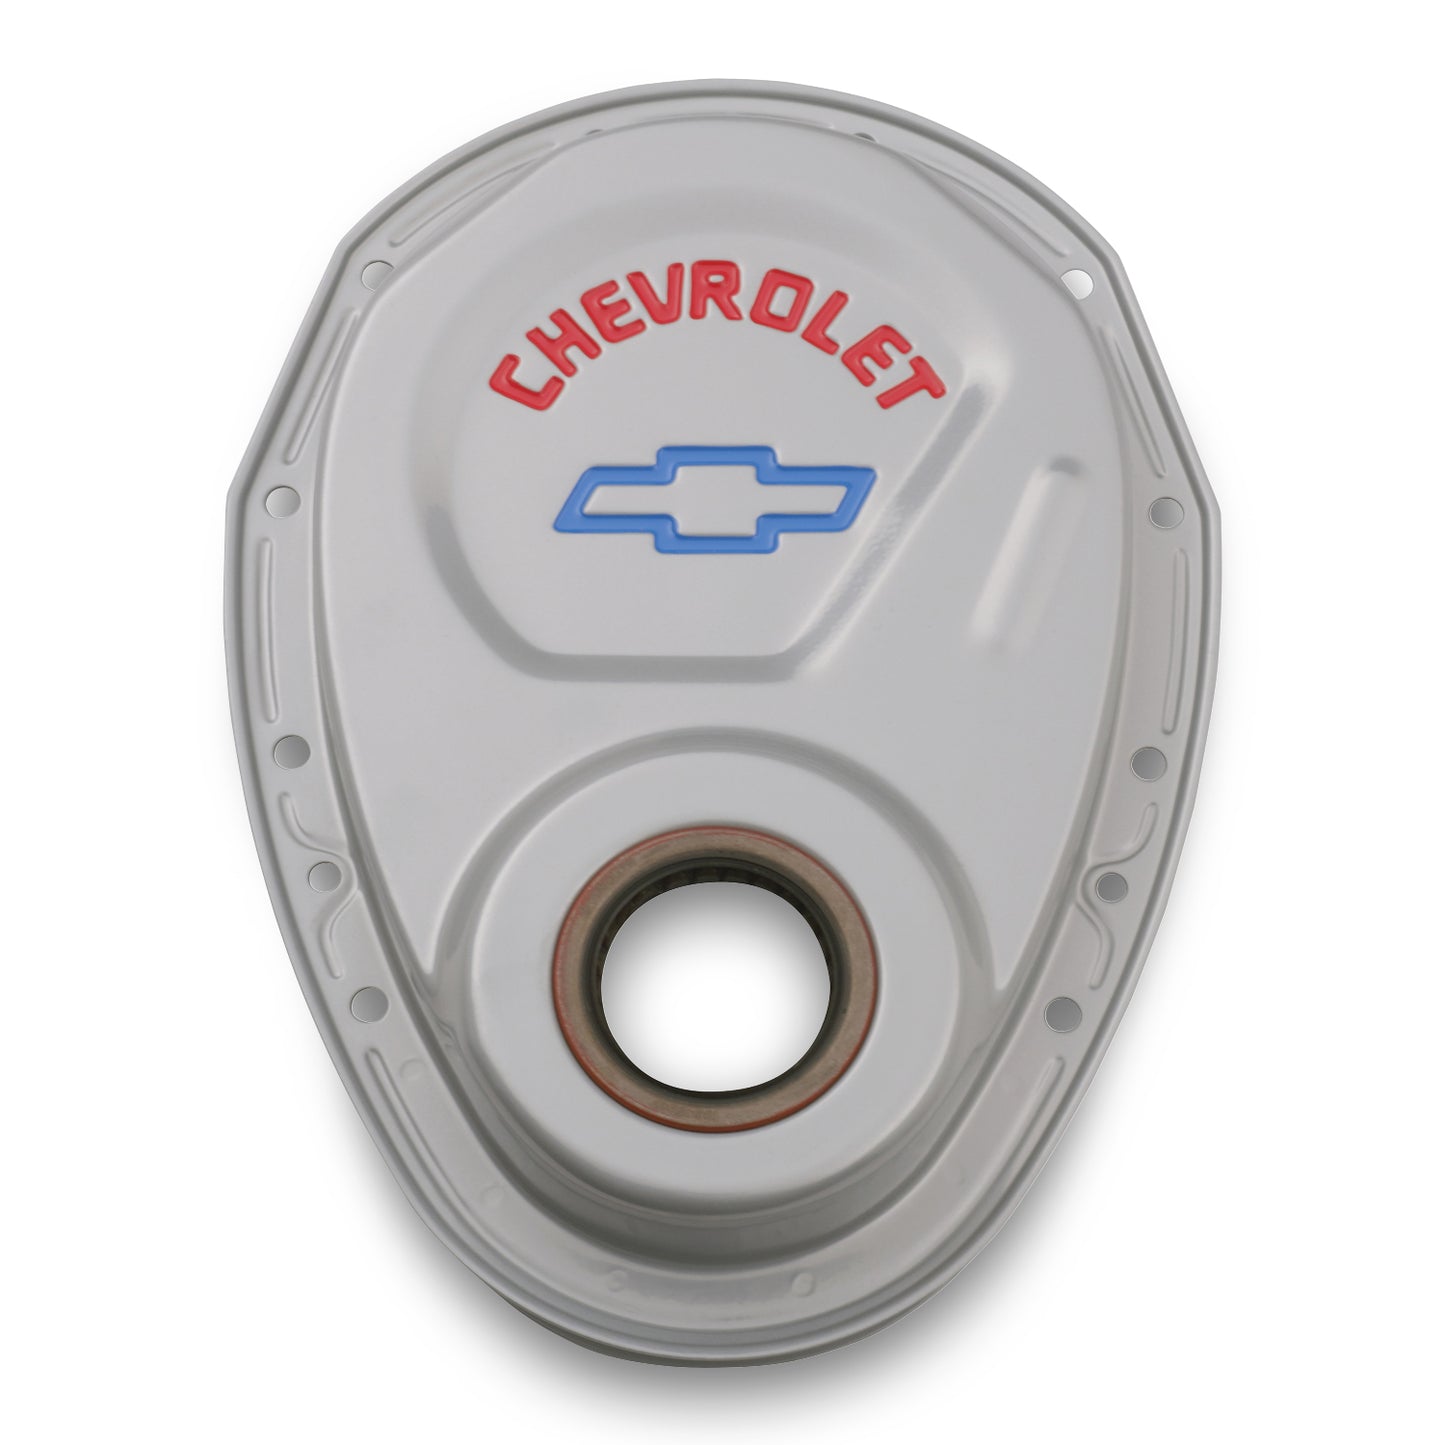 Proform Timing Chain Cover; Gray; Steel; With Chevy and Bowtie Logo; For SB Chevy 69-91 141-363